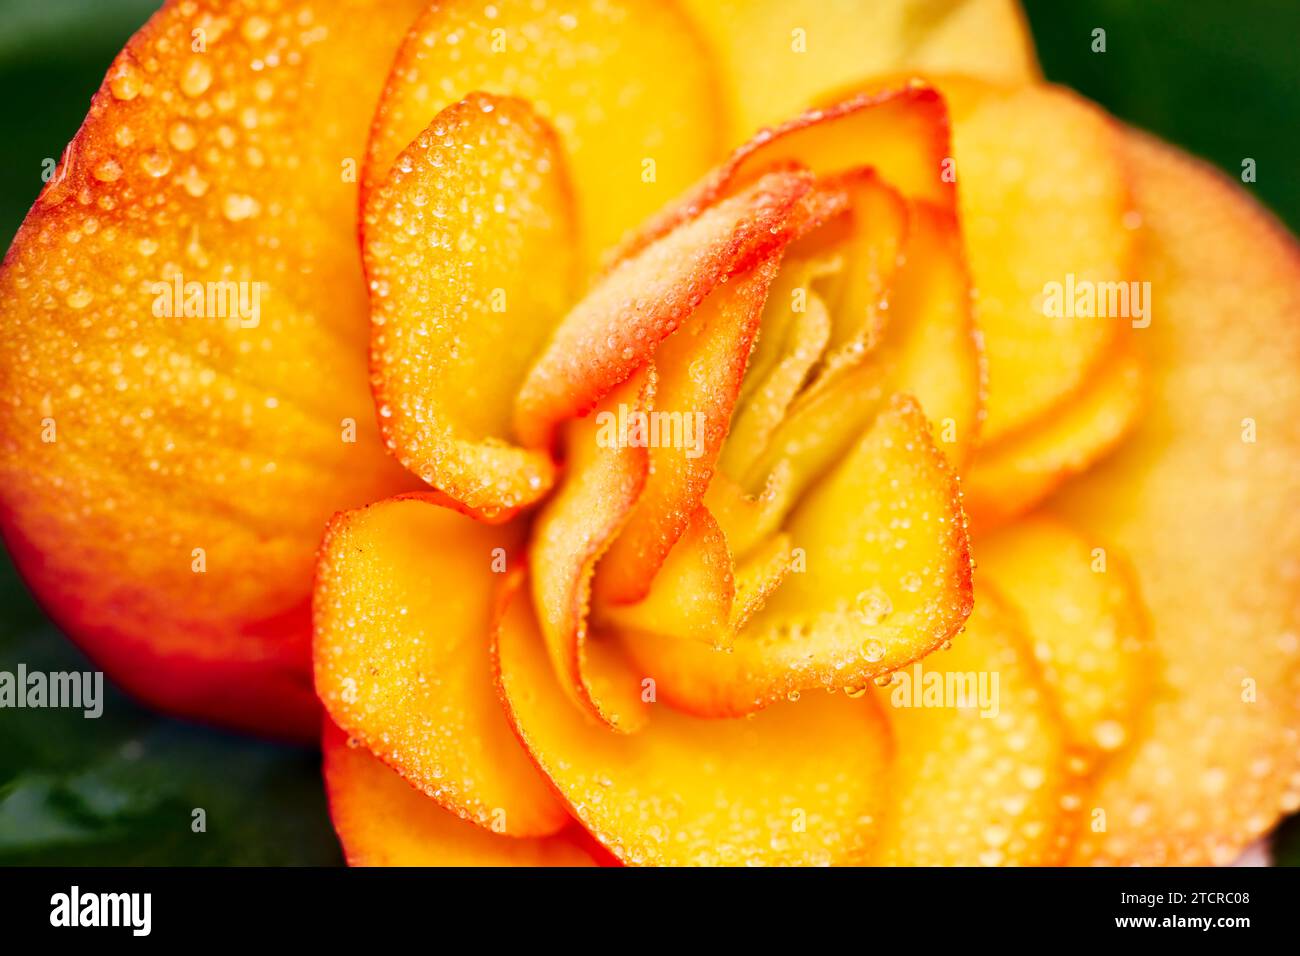 Close up of a yellow Begonia flower covered in dew drops. Stock Photo